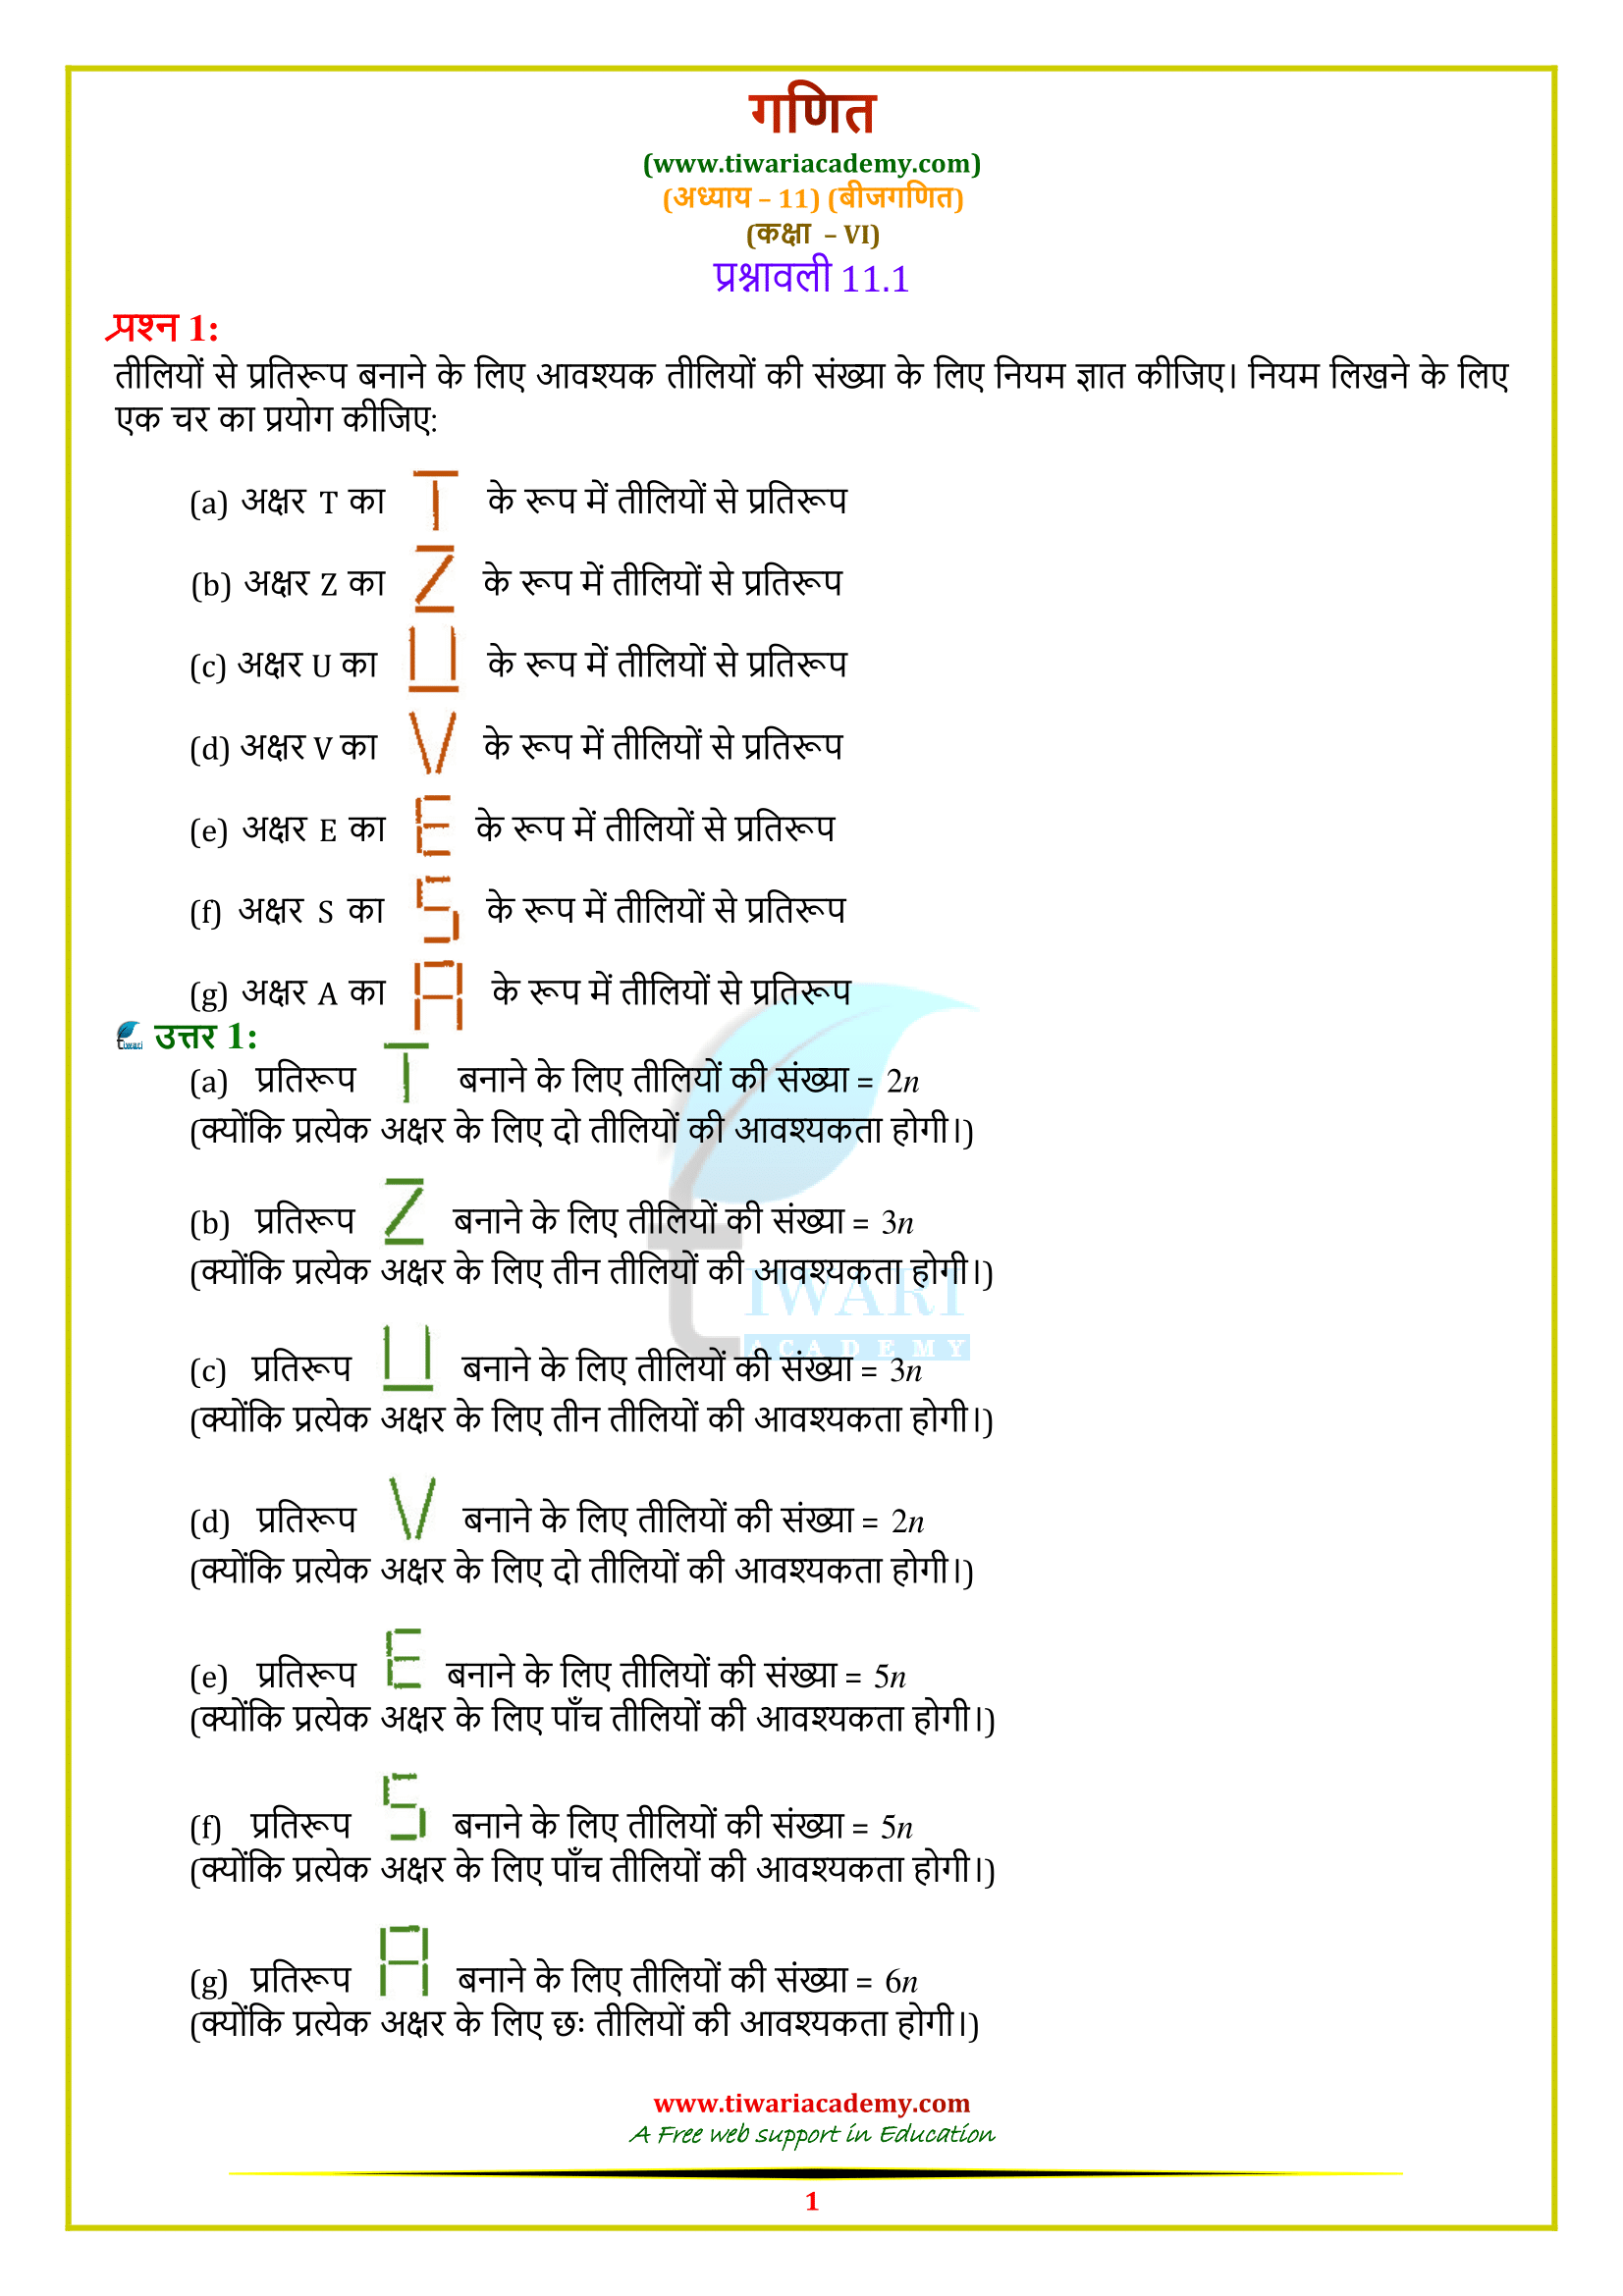 Class 6 Maths Chapter 11 Exercise 11.1 solutions